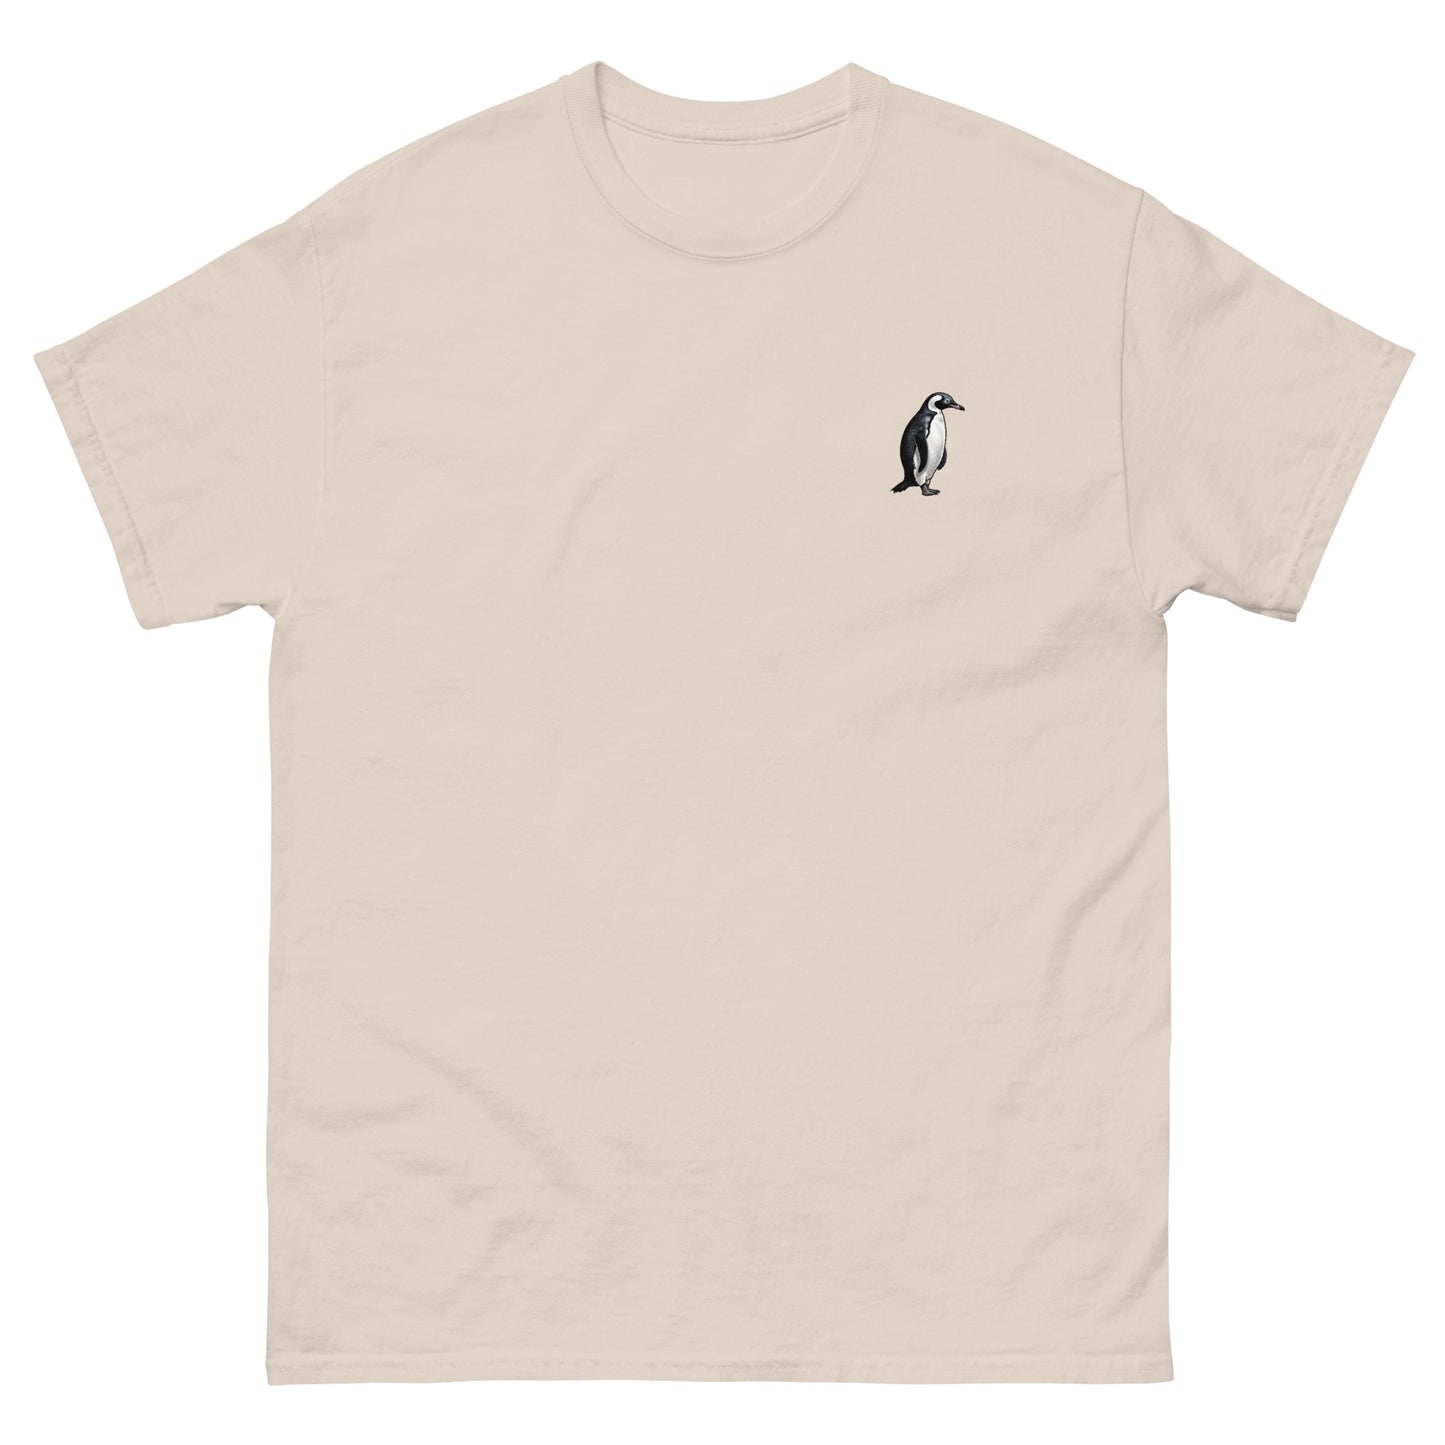 Ivory High Quality Tee - Front Design with a Penguin on left chest - Back Design with a Penguin and a Phrase "Penguins:always dressed to impress, walking on ice like a boss" print